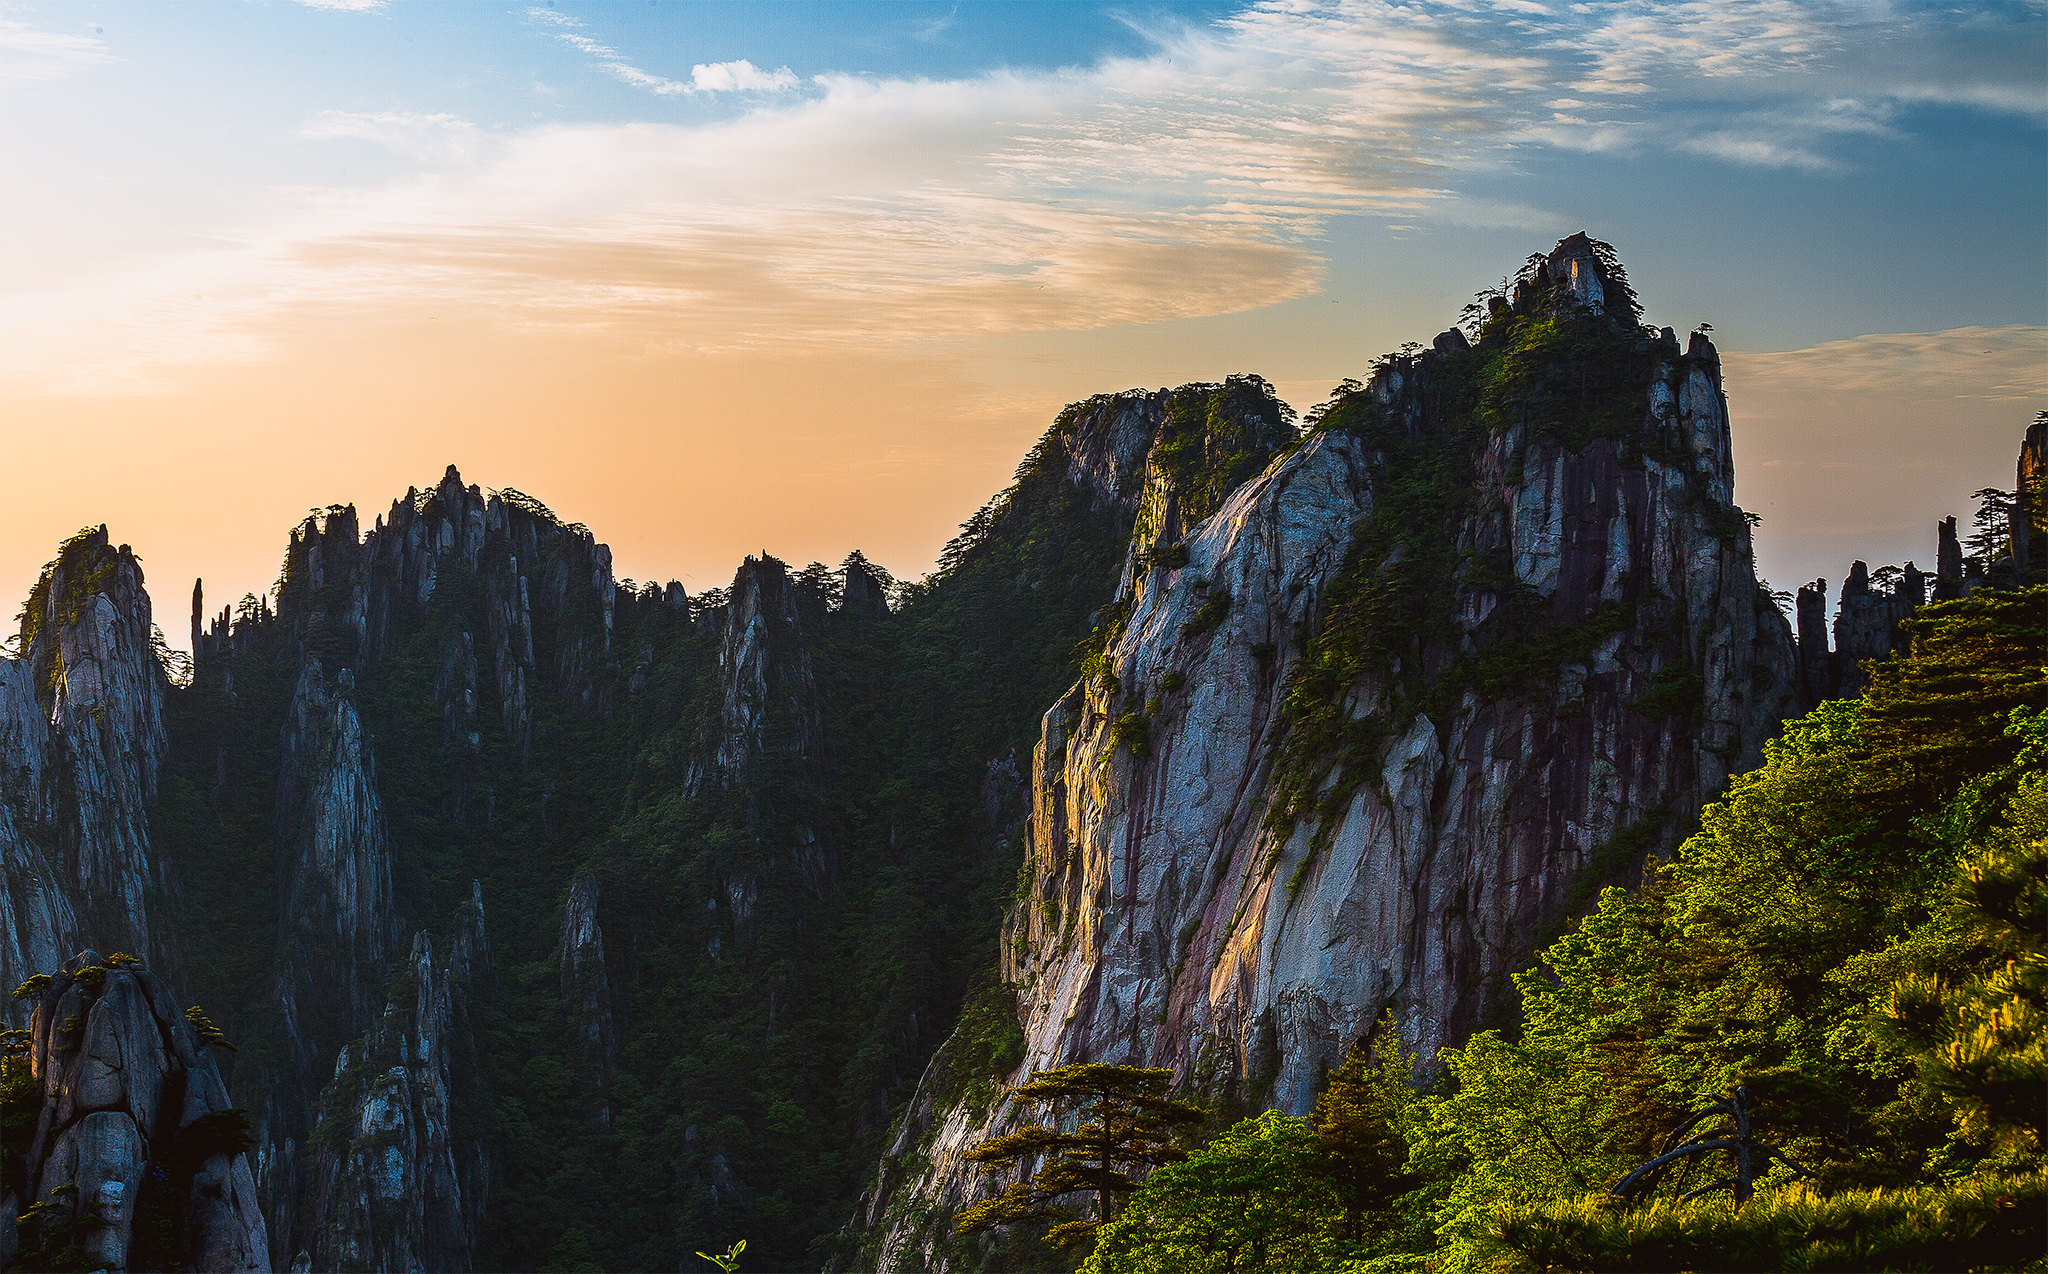 Sunrise in Huangshan yellow mountains, Anhui Province, China | Windows 10 Spotlight Images